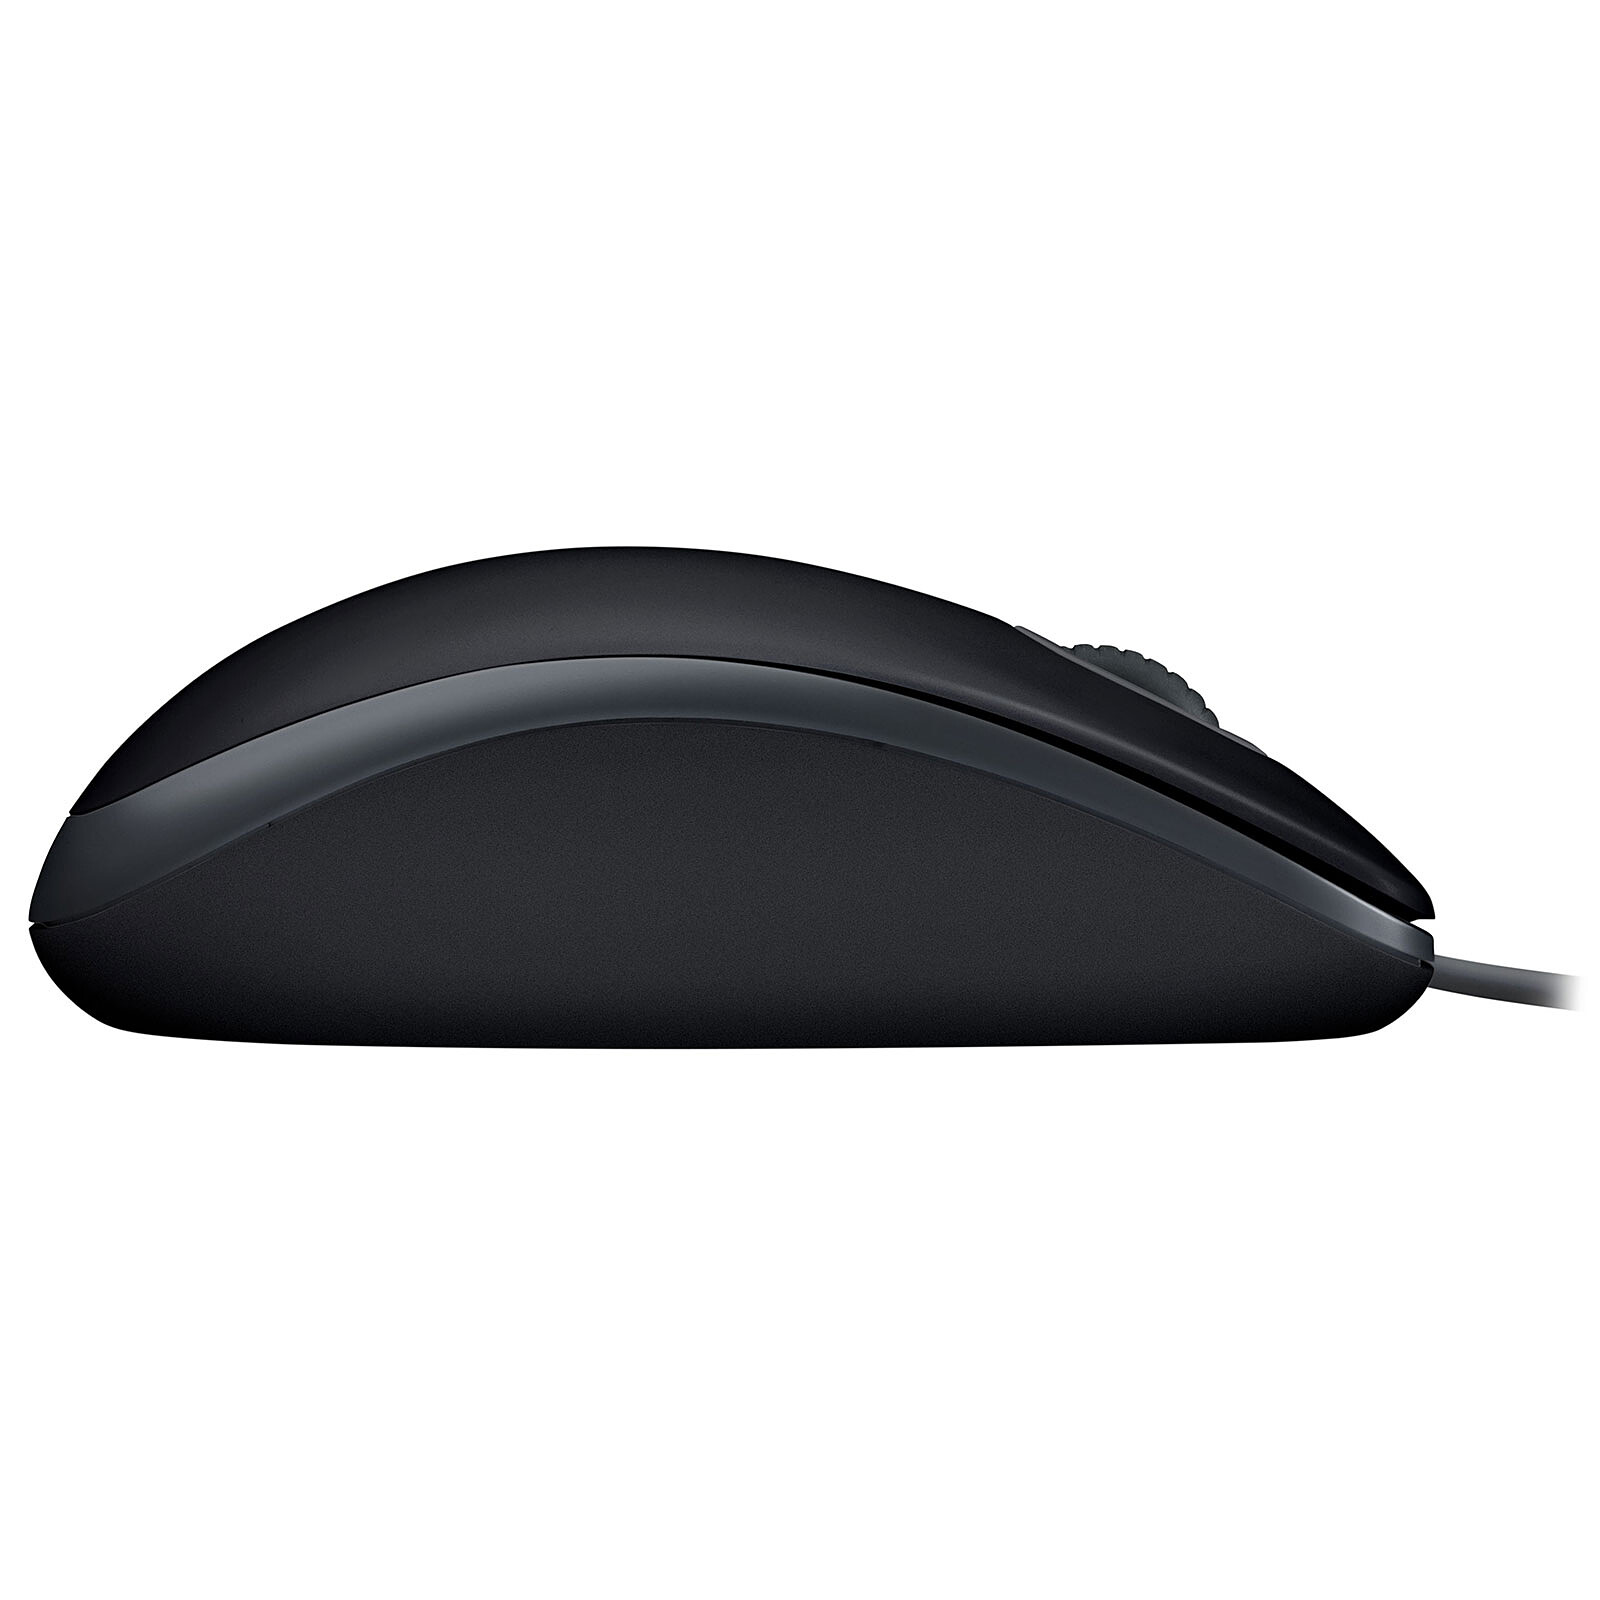 logitech m310 mouse not working right horizonily